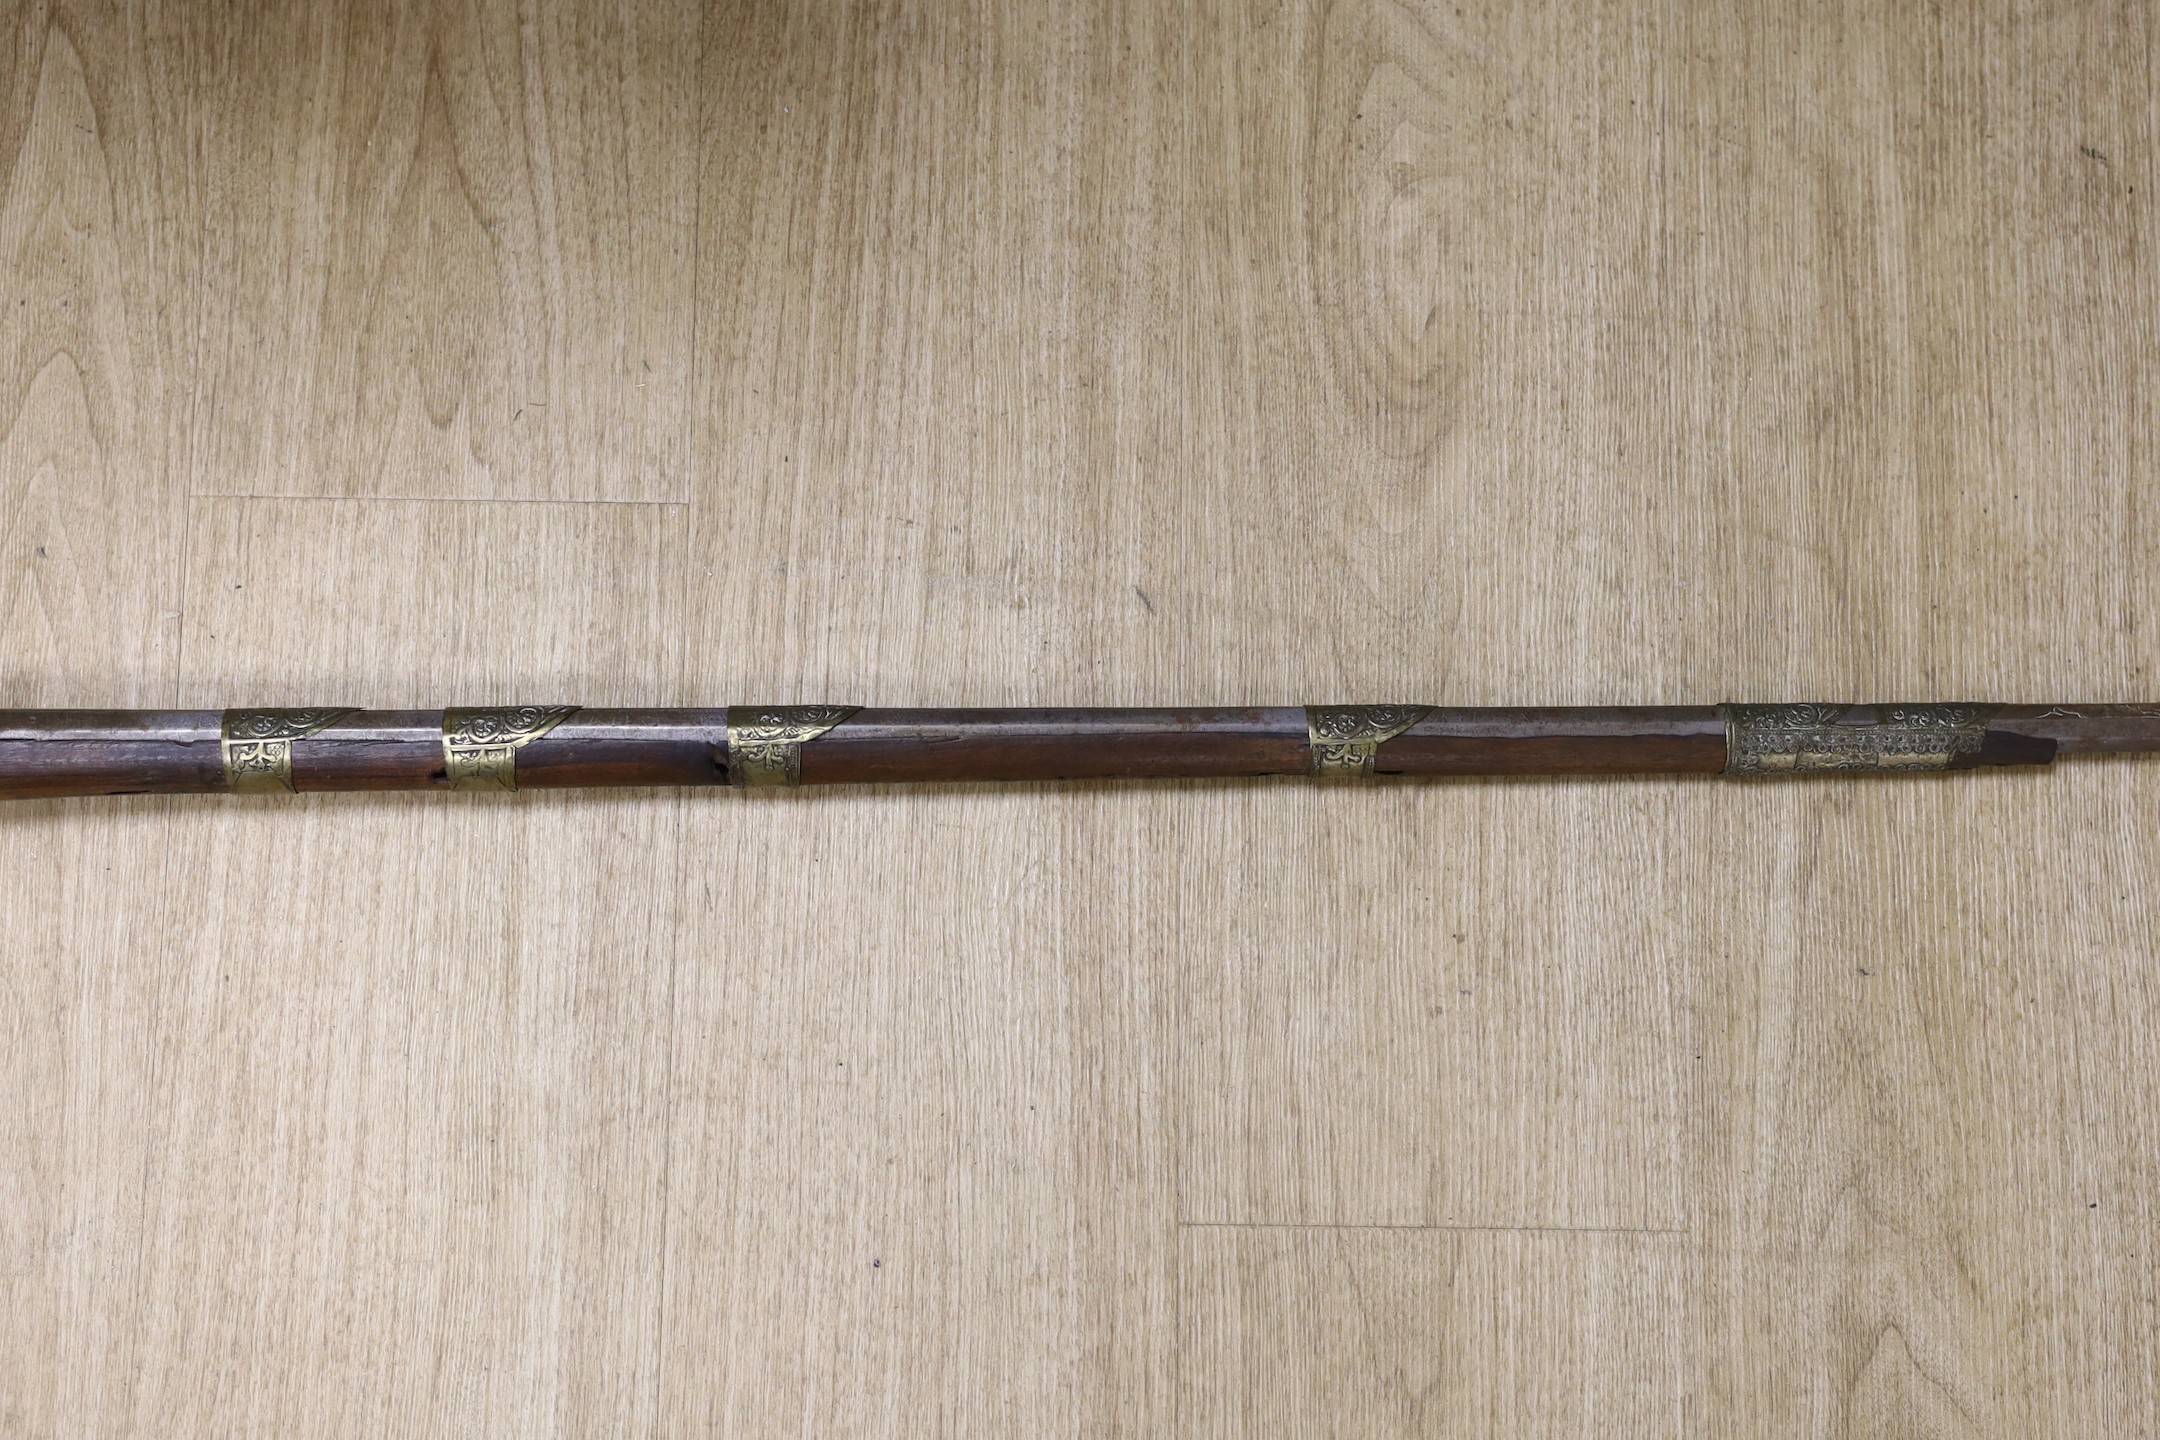 An Eastern decoratively metal mounted antique musket, 132cms long.